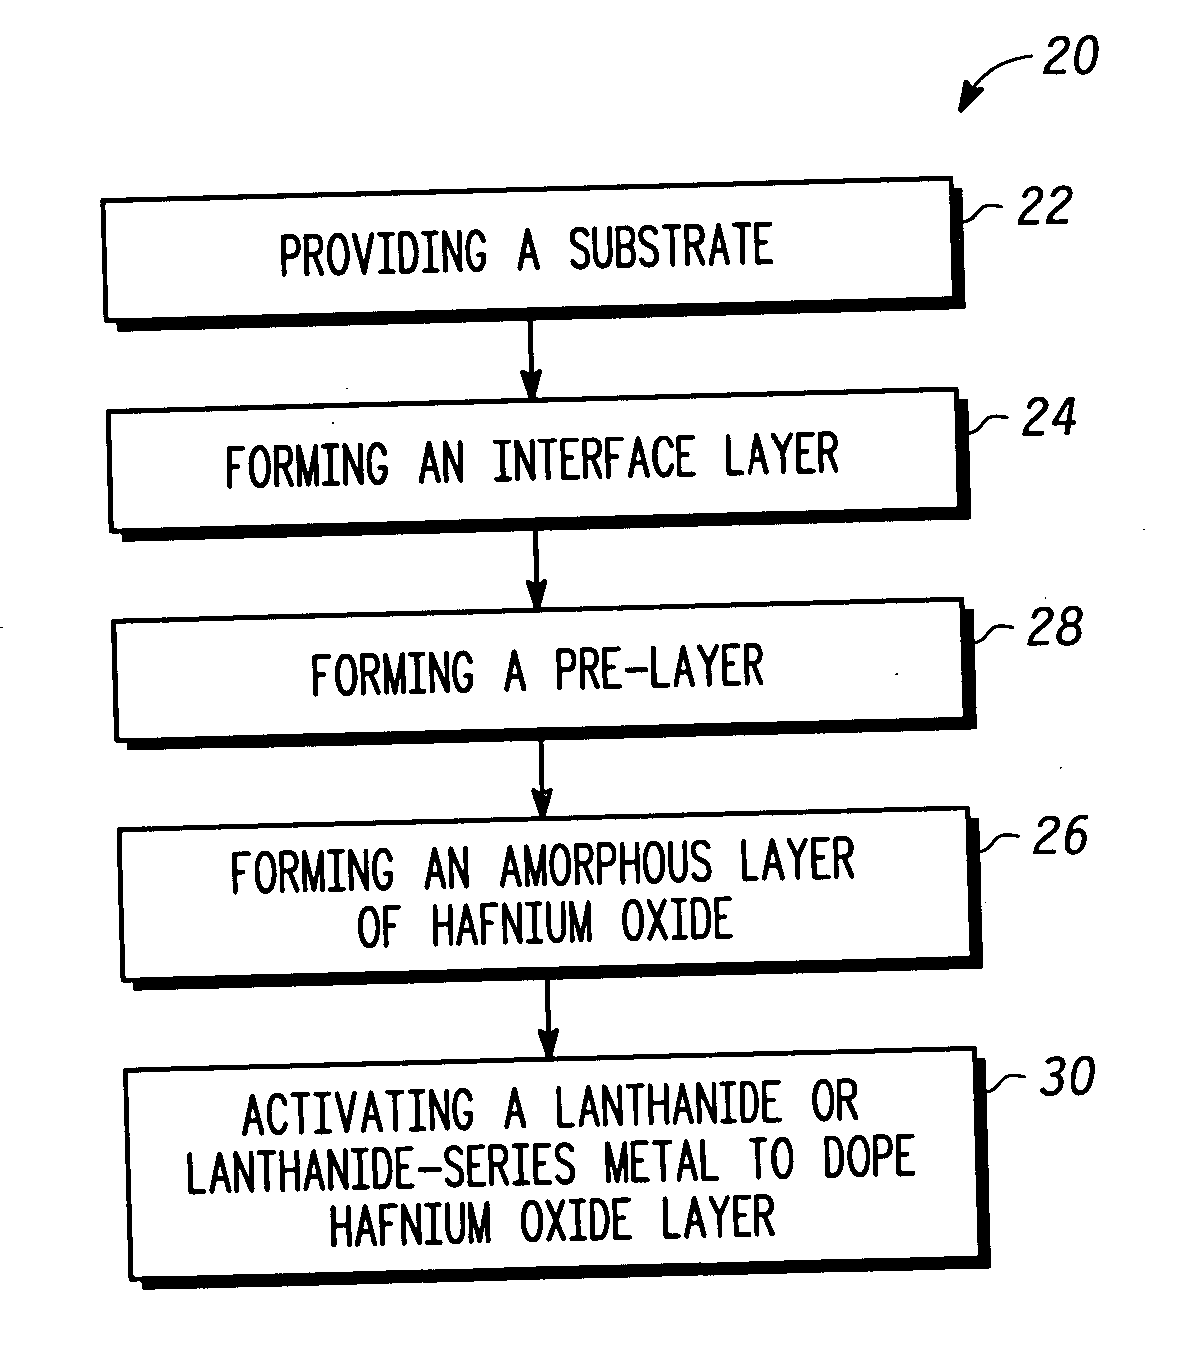 Semiconductor structures and methods of fabricating semiconductor structures comprising hafnium oxide modified with lanthanum, a lanthanide-series metal, or a combination thereof